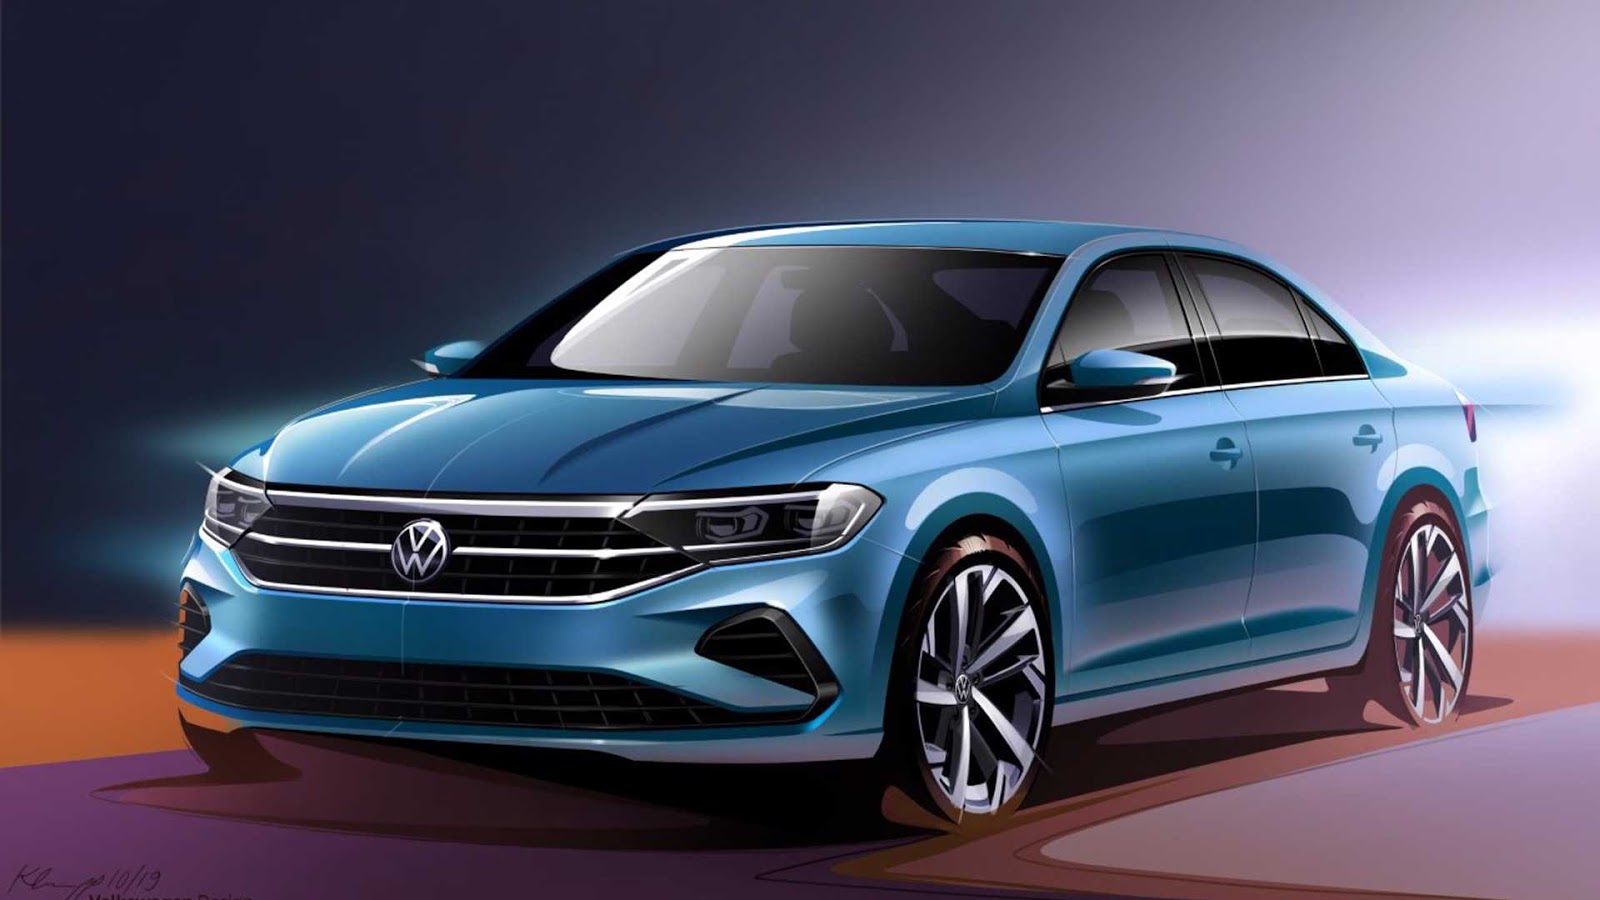 From Russia Love - the next generation Volkswagen Polo is coming 2020